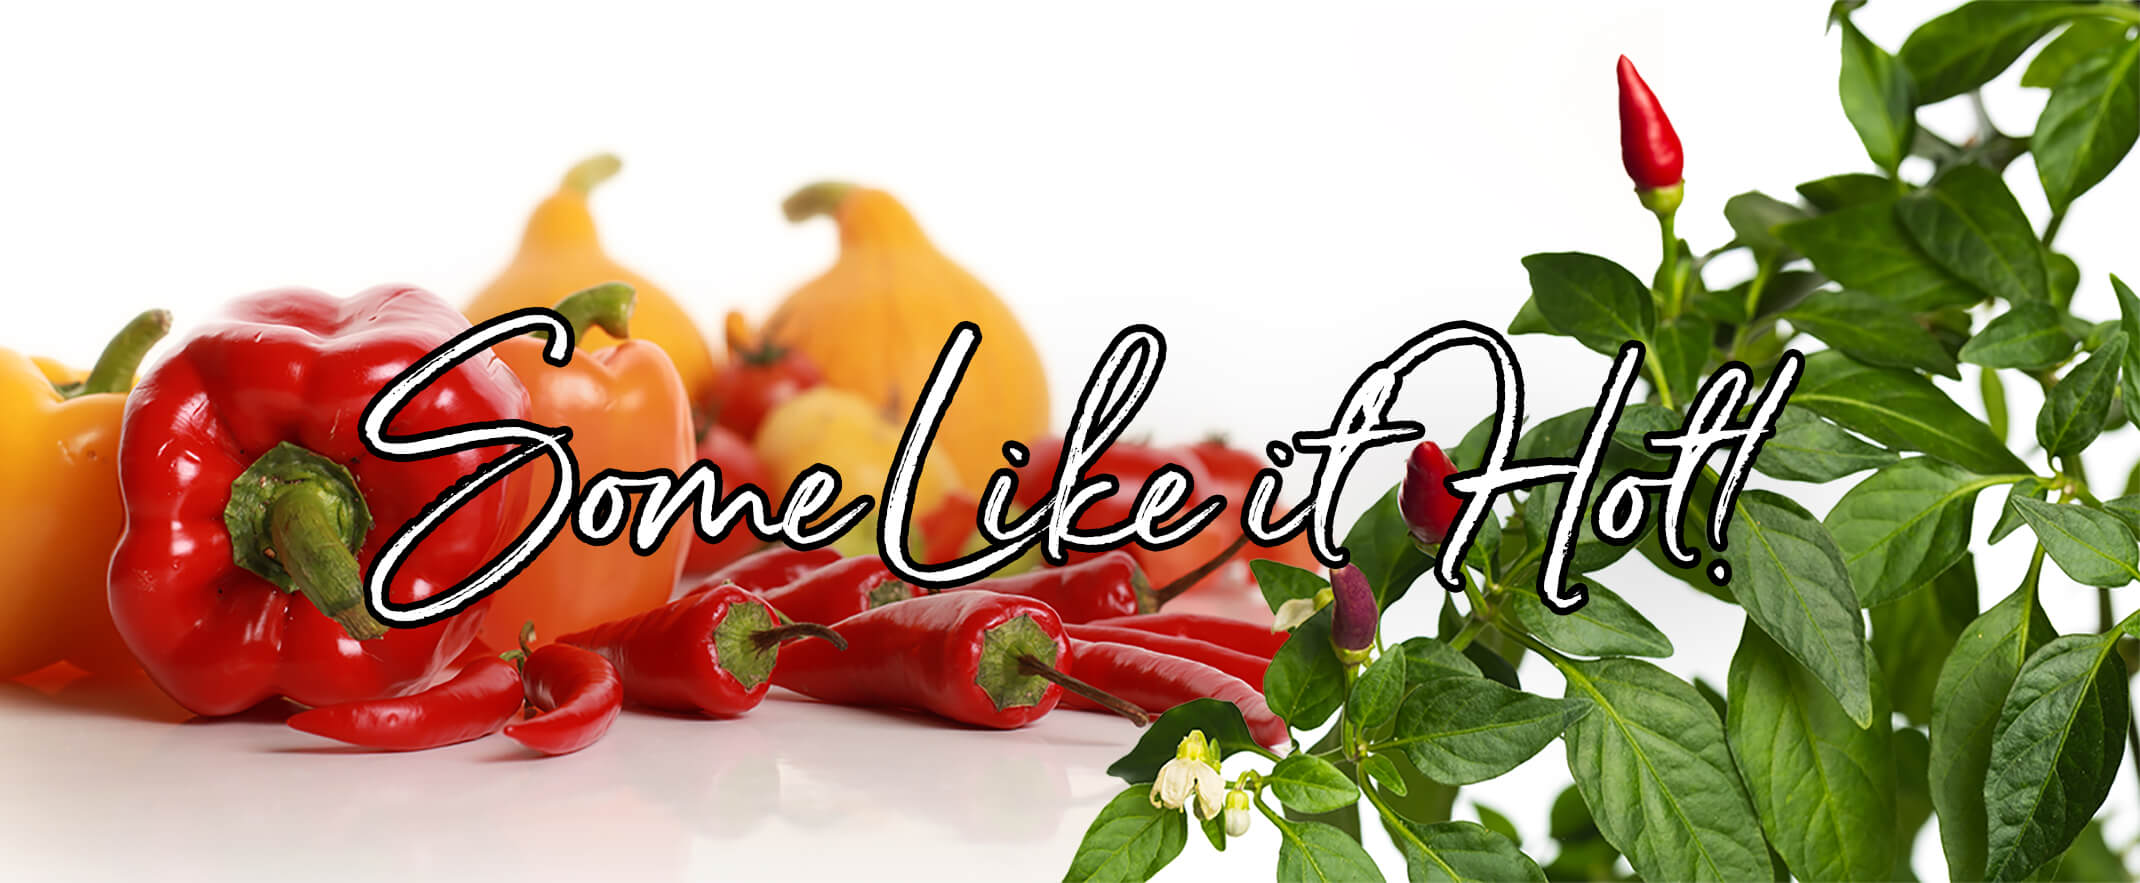 A variety of Sweet and Hot Peppers on a white background  with the text 